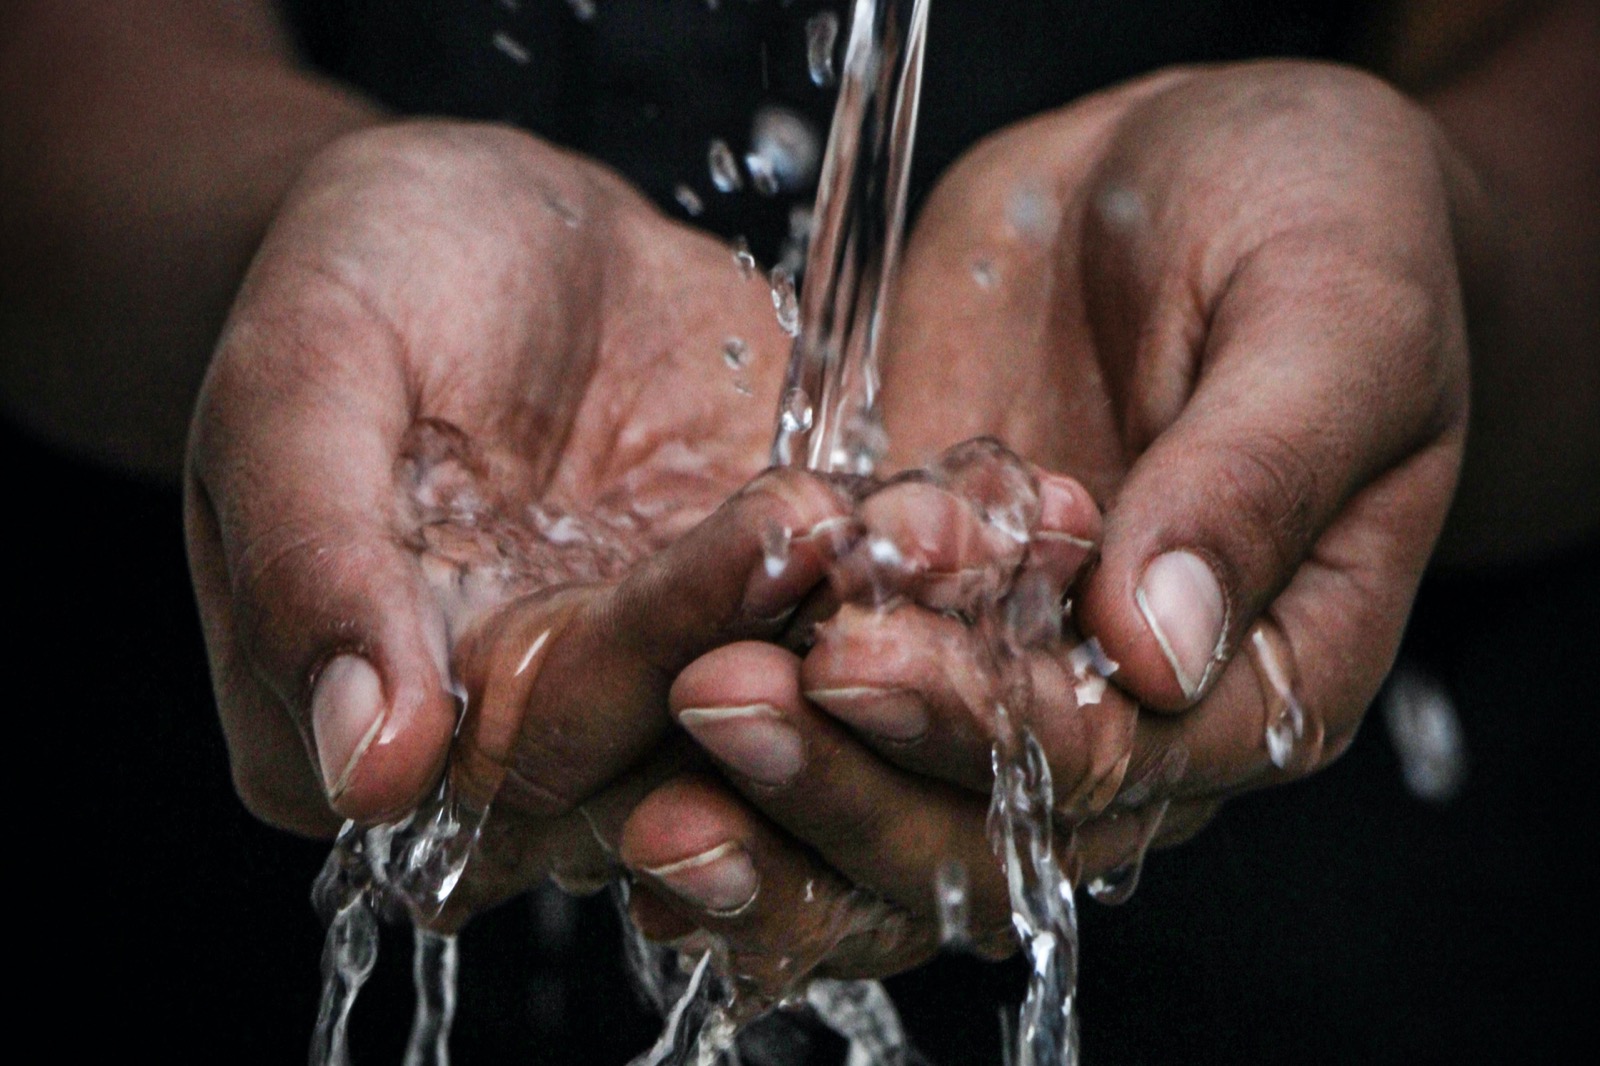 Hands together with water washing over them.